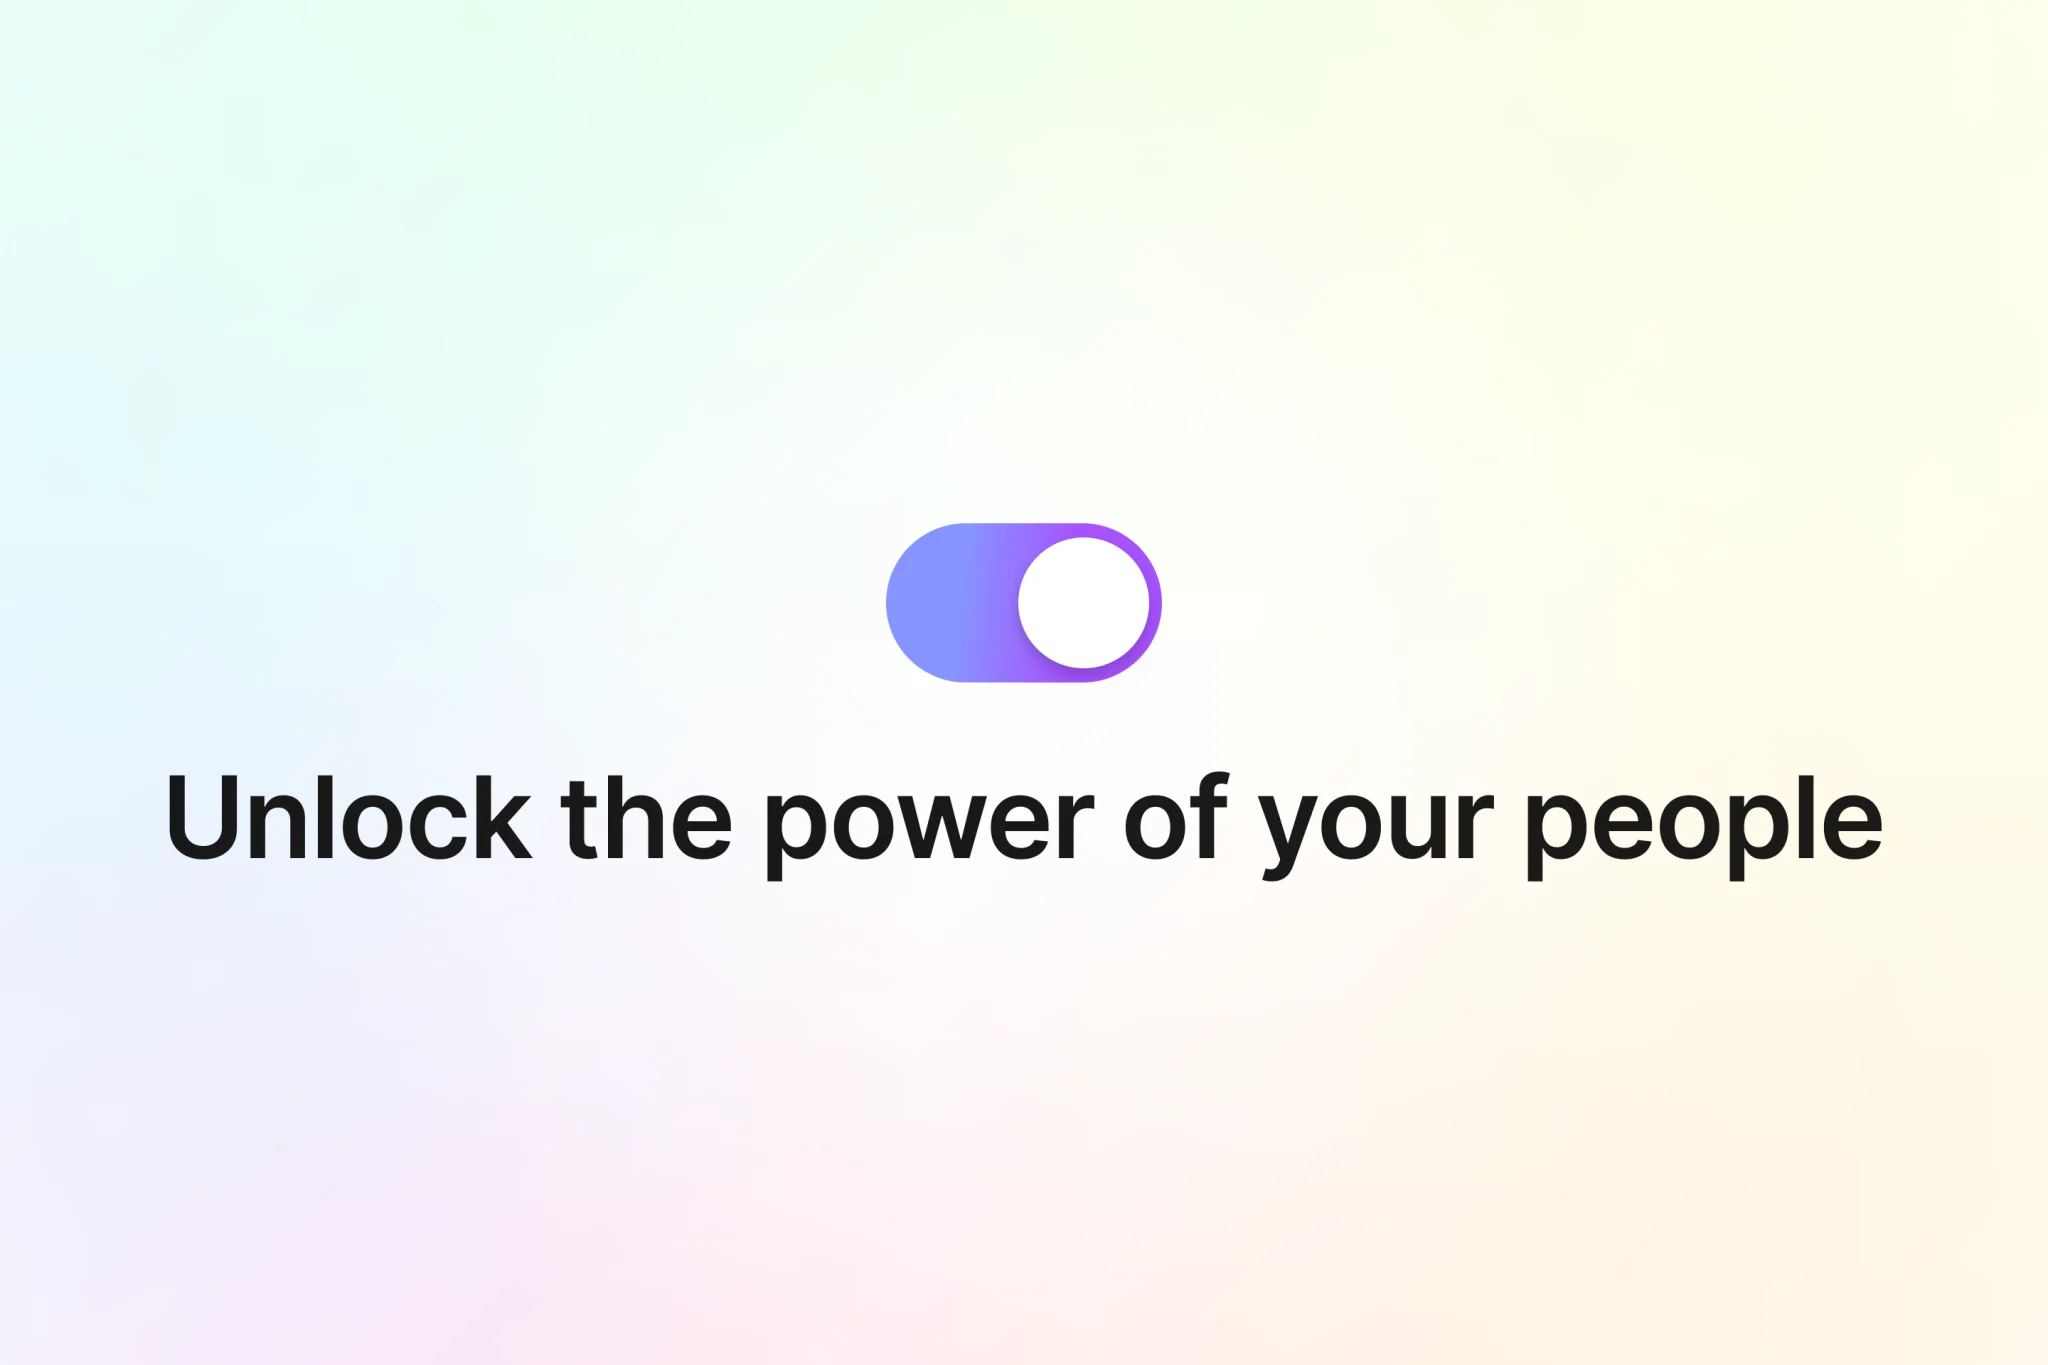 Unlock the power of your people